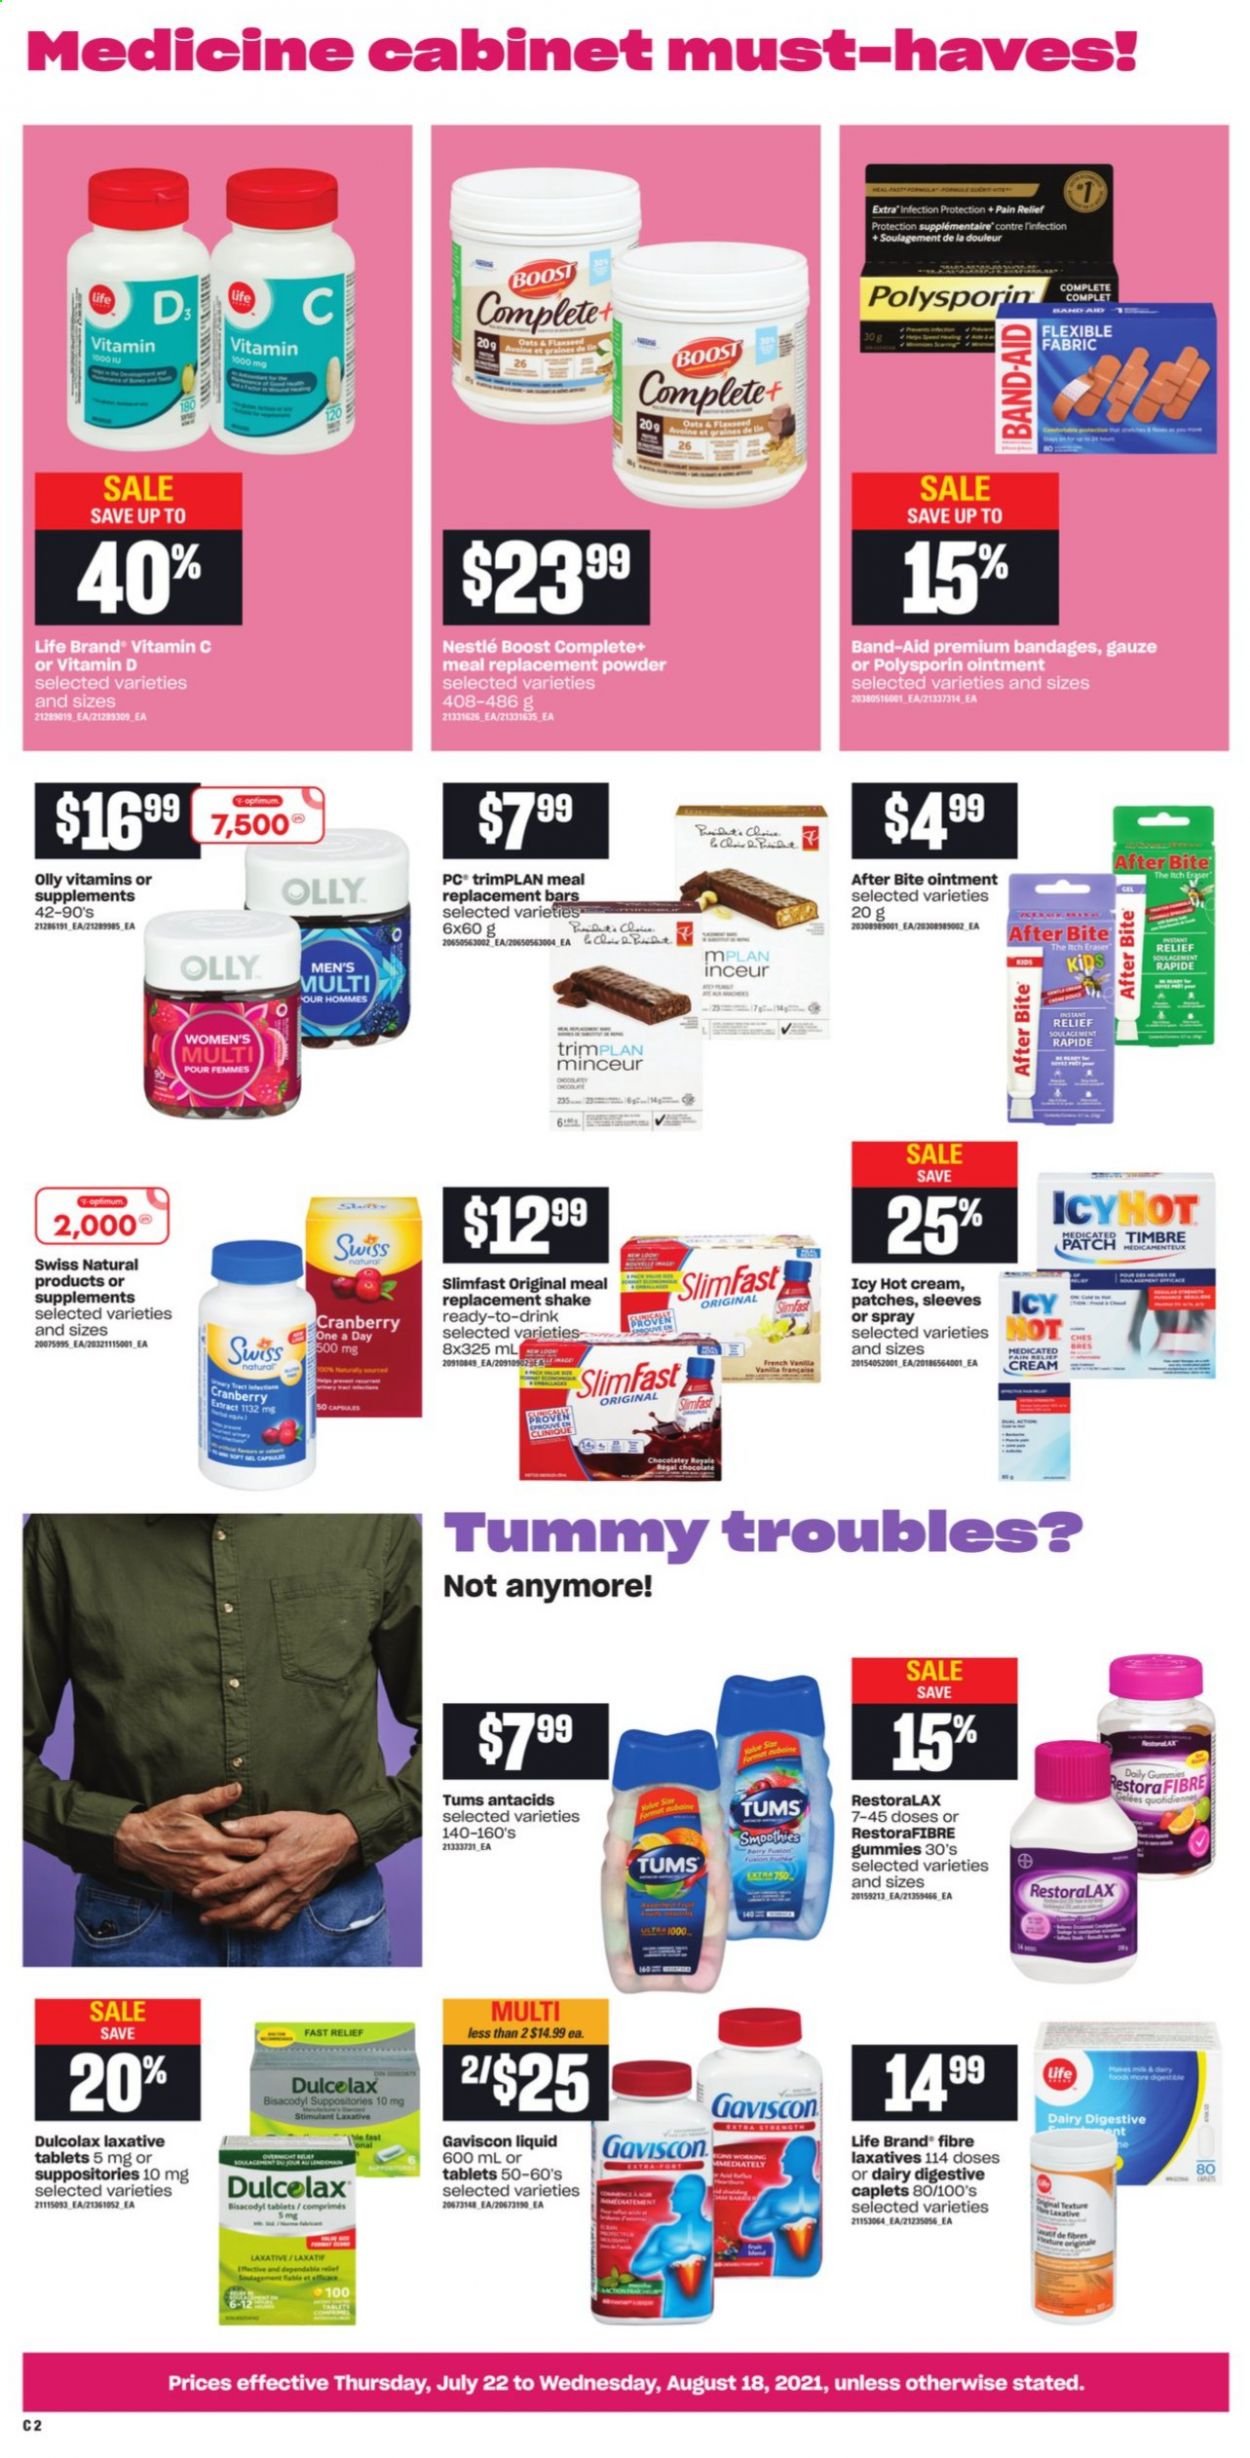 thumbnail - Atlantic Superstore Flyer - July 22, 2021 - August 18, 2021 - Sales products - Slimfast, shake, chocolate, Digestive, oats, smoothie, Boost, ointment, Optimum, pain relief, Dulcolax, vitamin c, Gaviscon, laxative, Nestlé. Page 2.